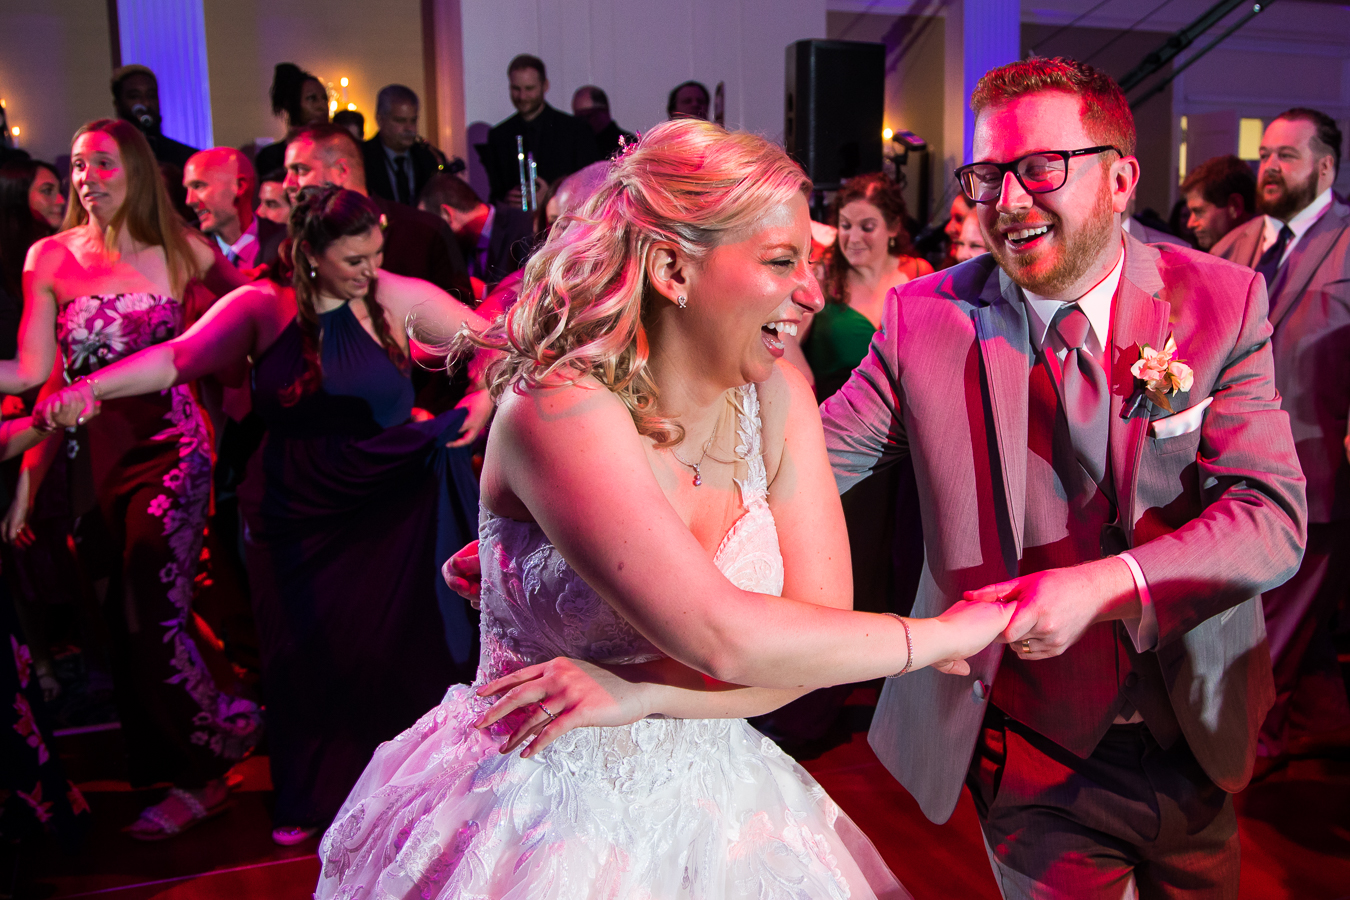 new jersey wedding photographer, rhinehart photography, captures this fun, candid image of the bride and groom as they dance together with one another during their wedding reception at the palace 